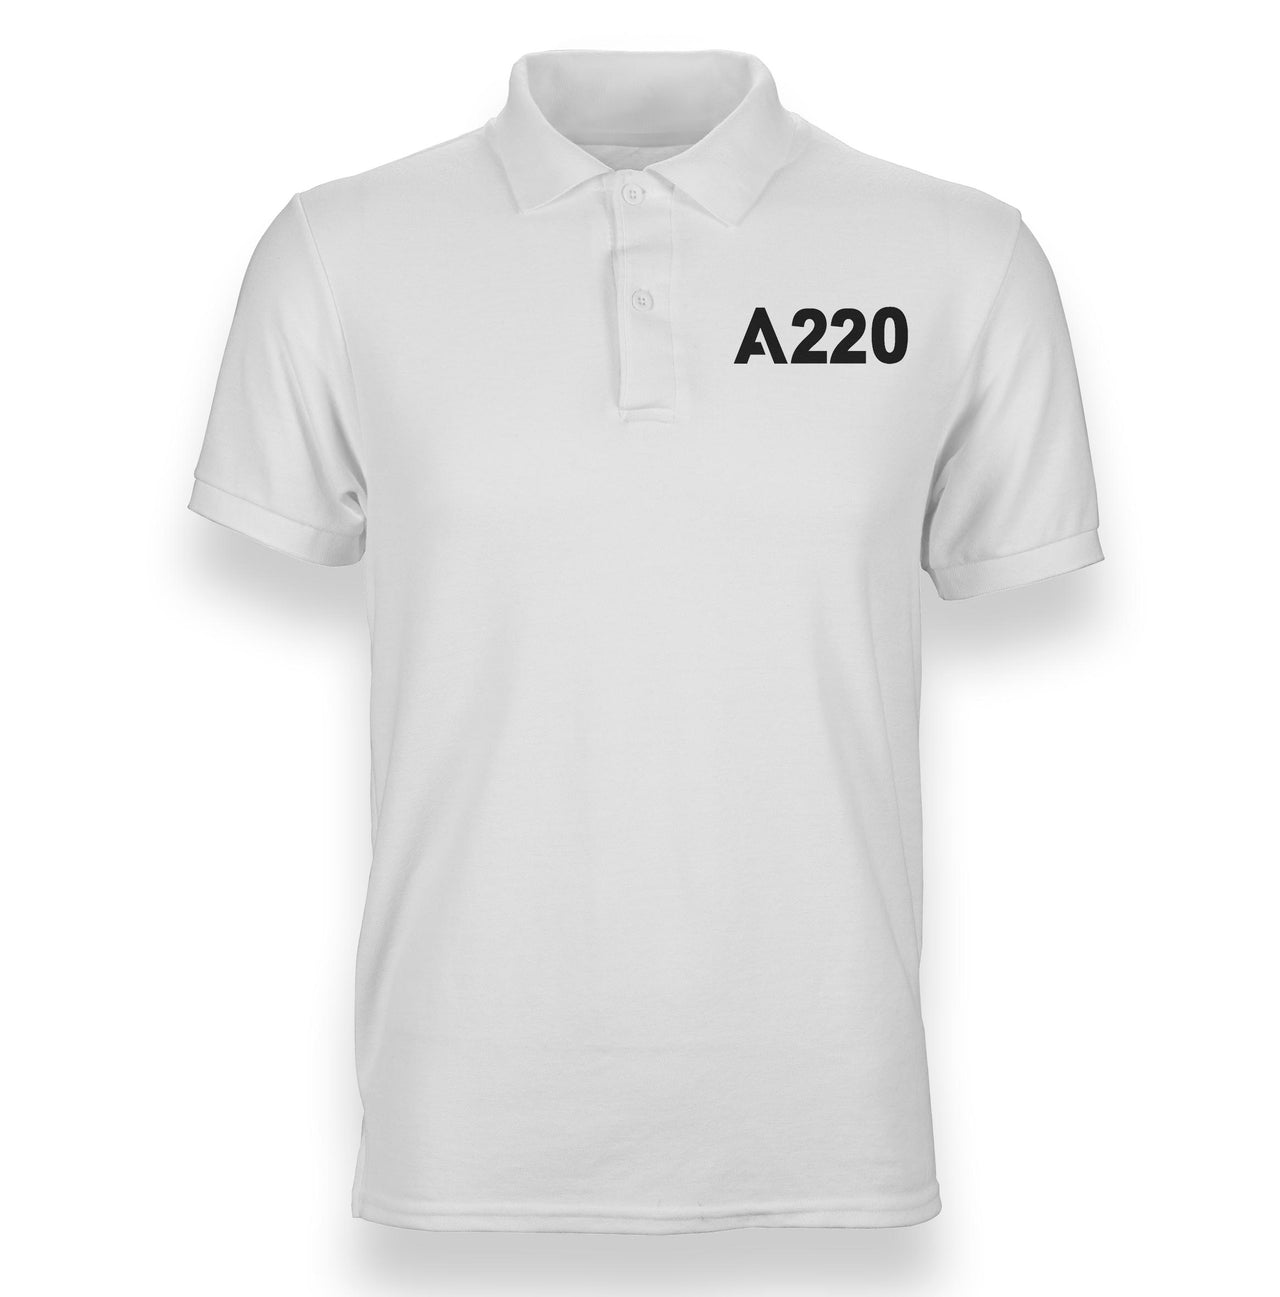 A220 Flat Text Designed Polo T-Shirts